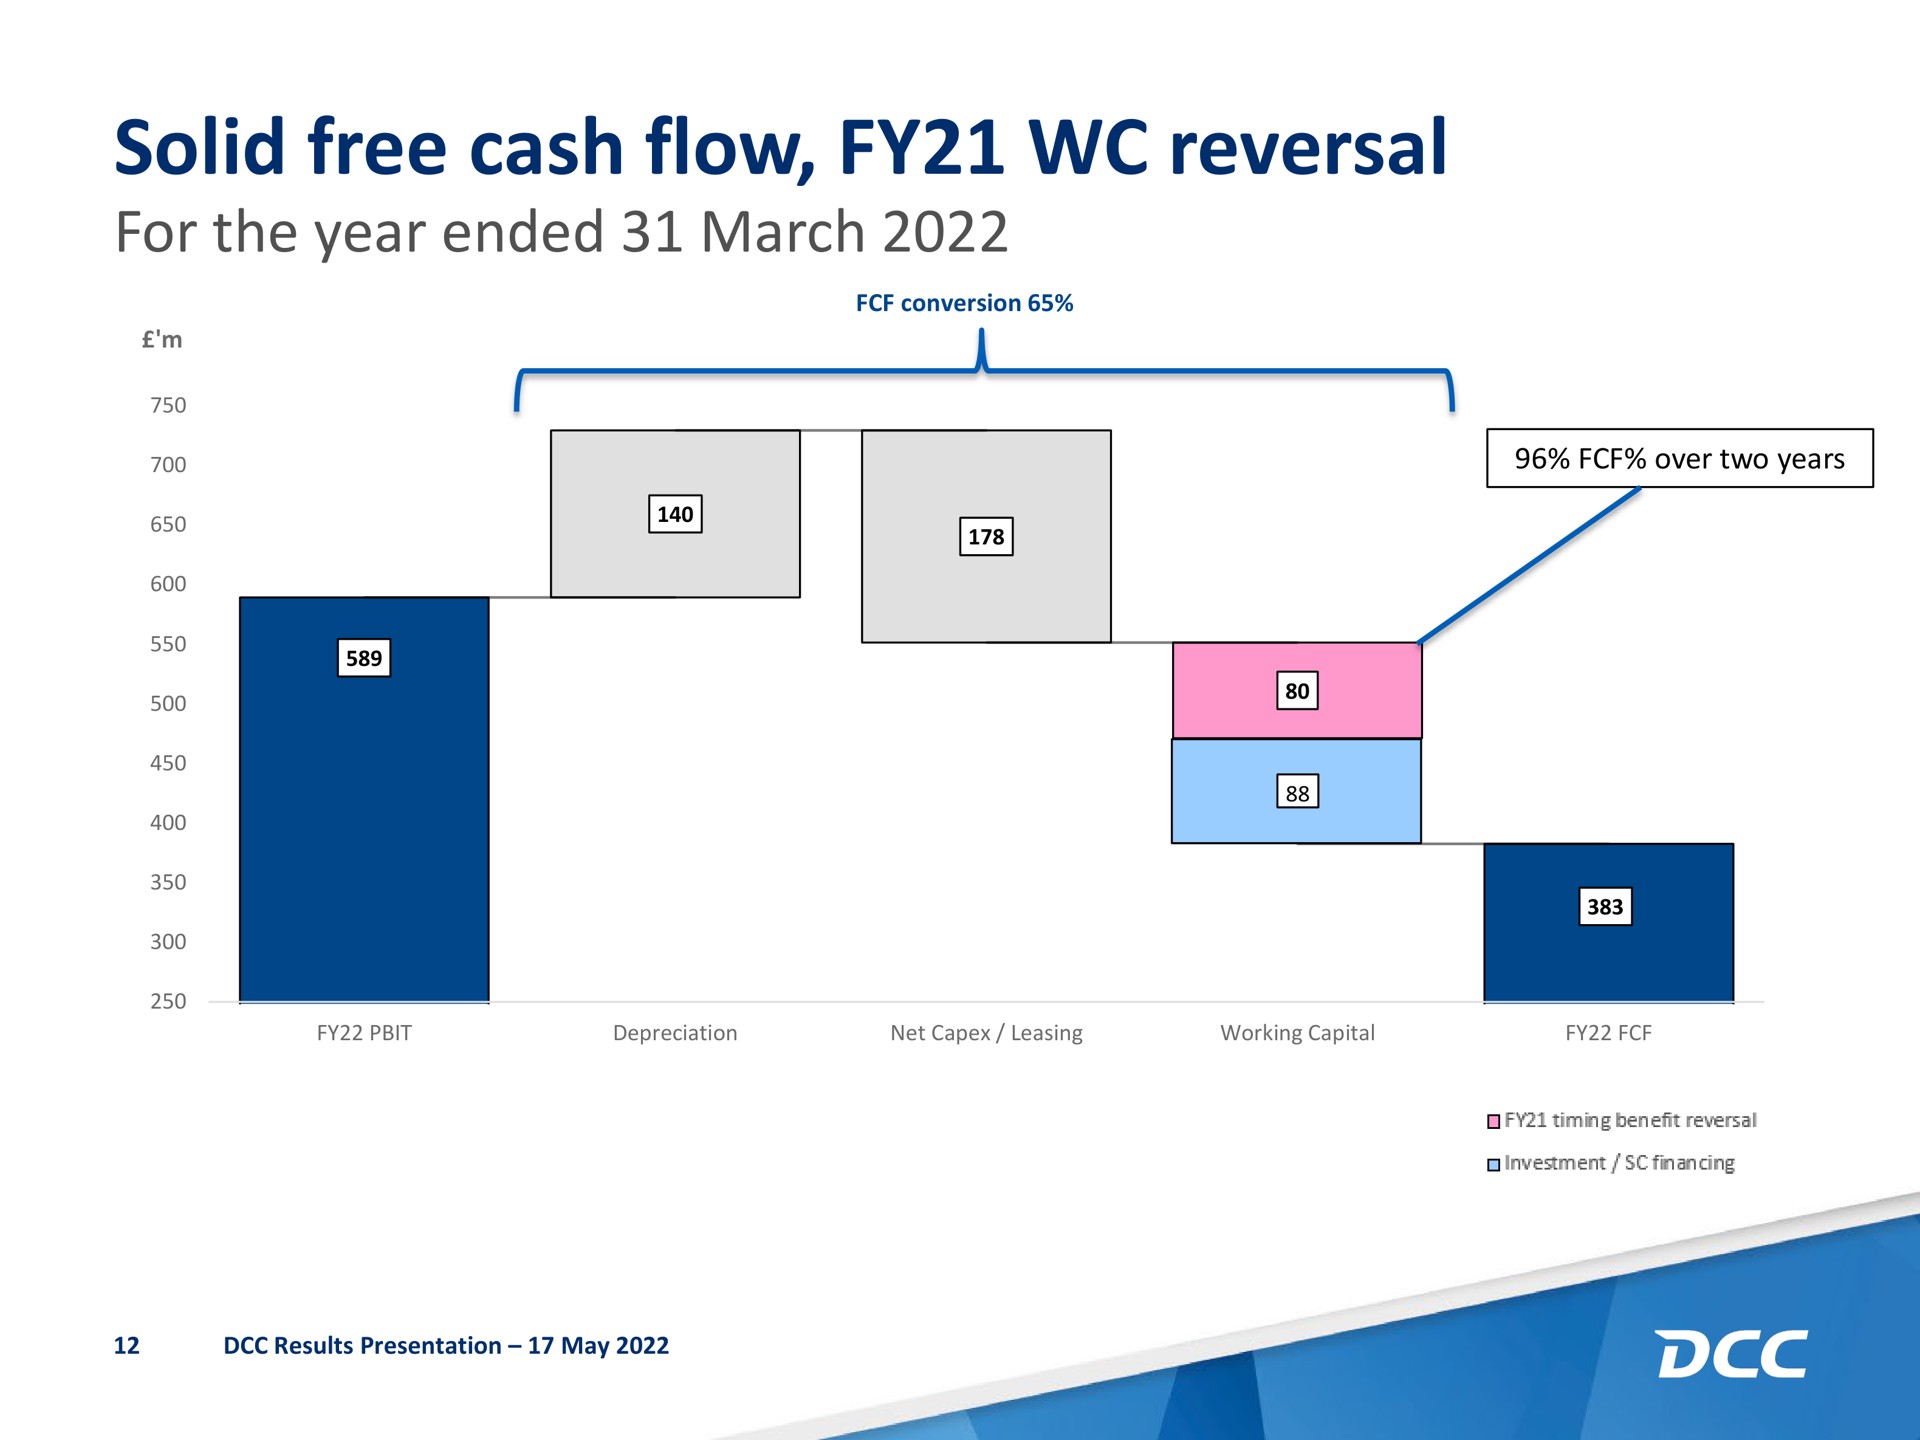 solid free cash flow reversal for the year ended march | DCC